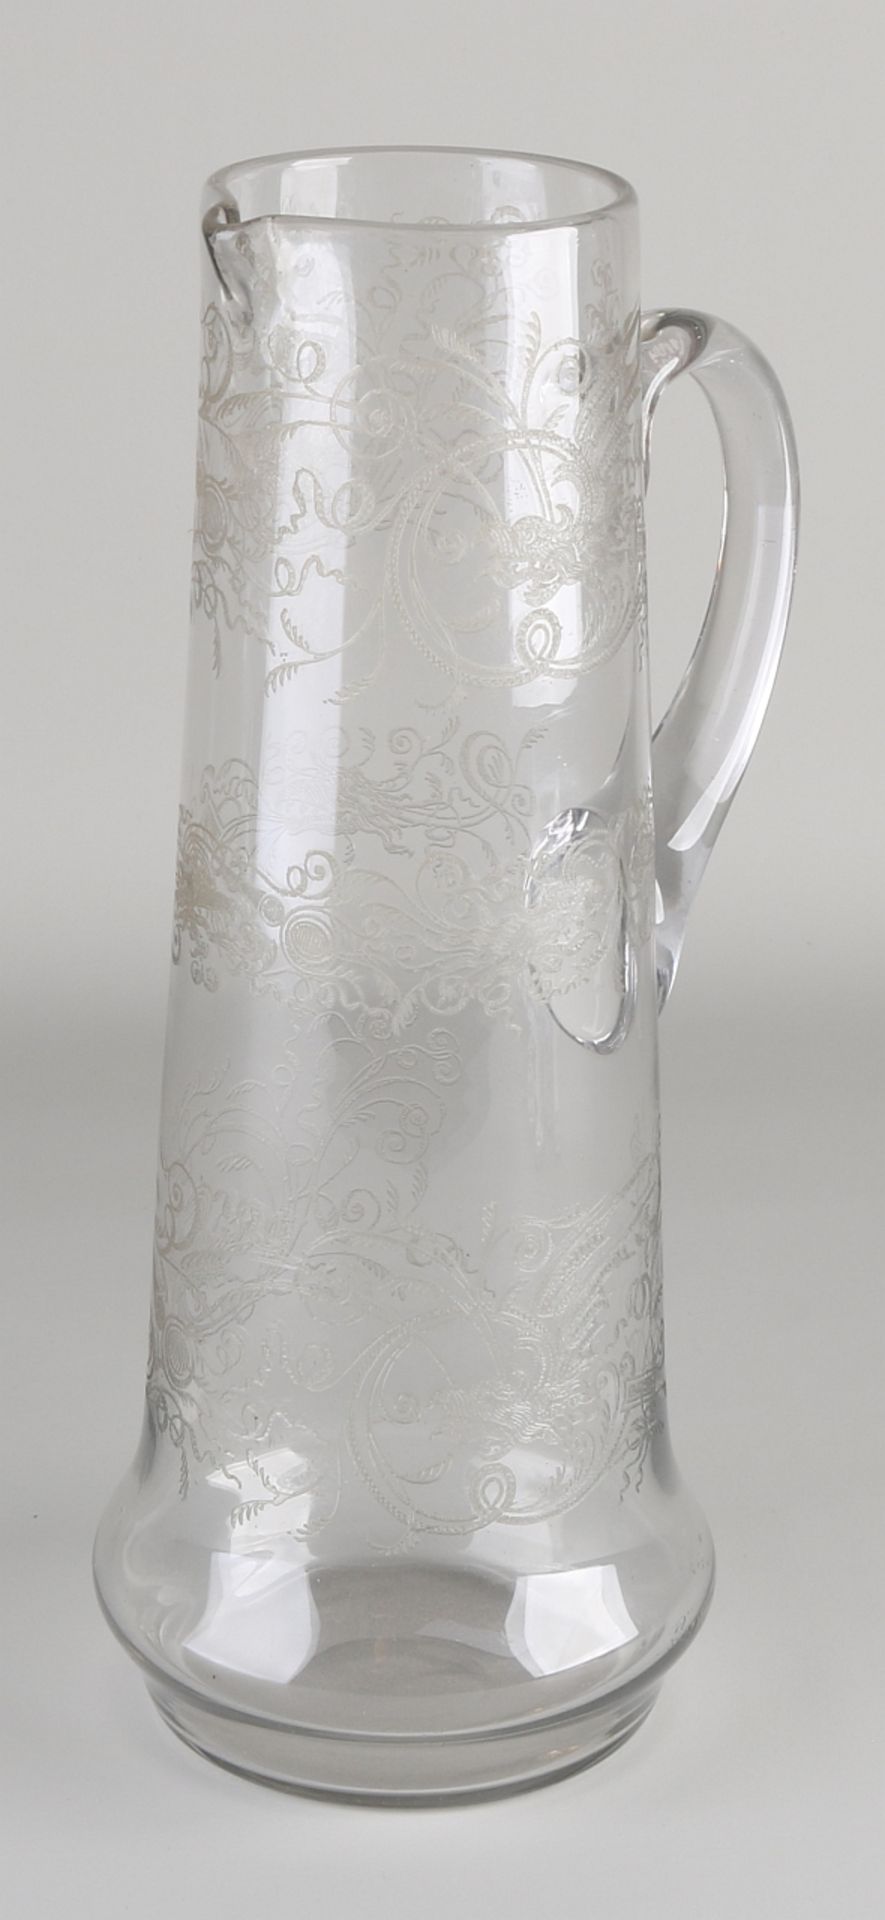 Antique pitcher, 1900 - Image 2 of 2